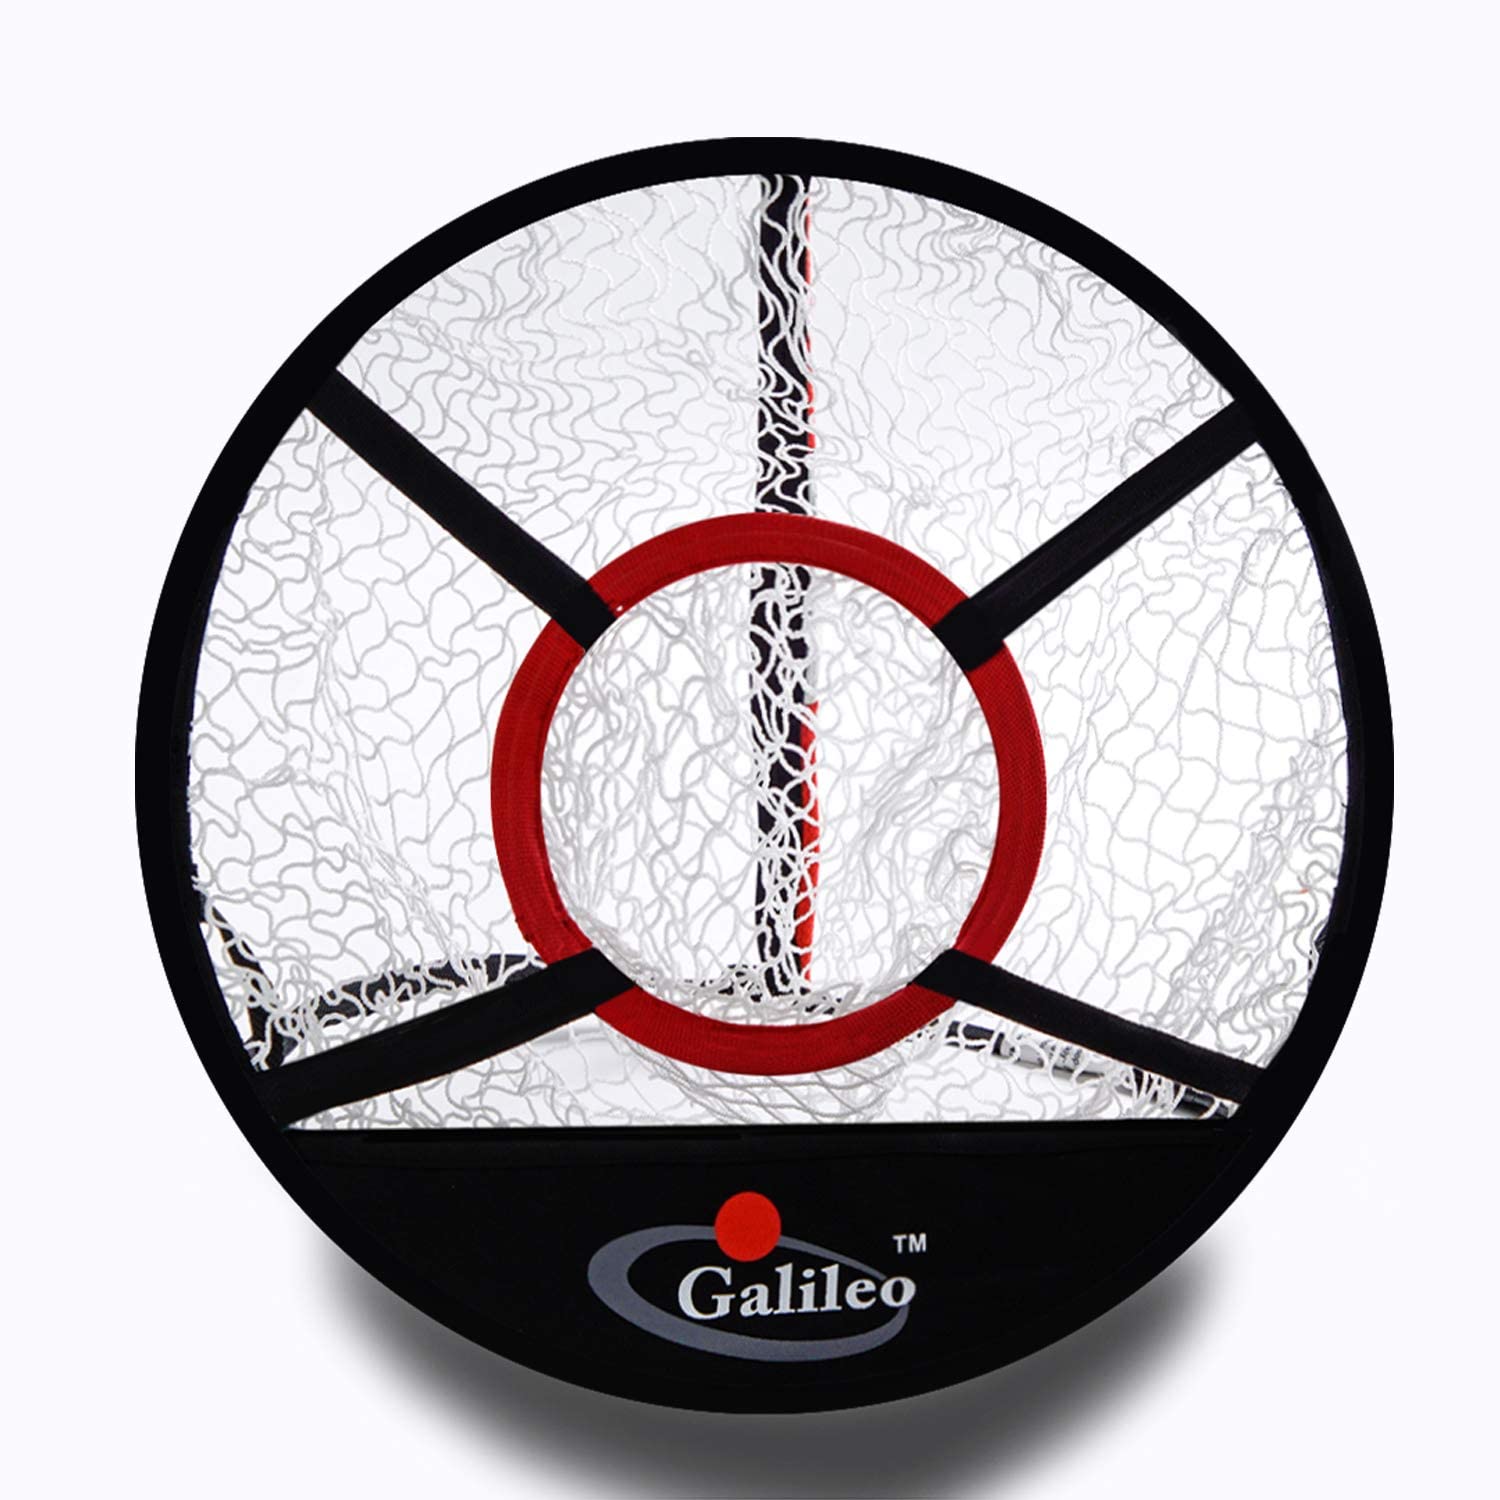 Galileo Sports Golf Chipping Net Golf Chipping Net Chipping Golf Chipping Practice Net Pop Up Golf Chipping Net Golf Chipping Game Indoor Outdoor Use